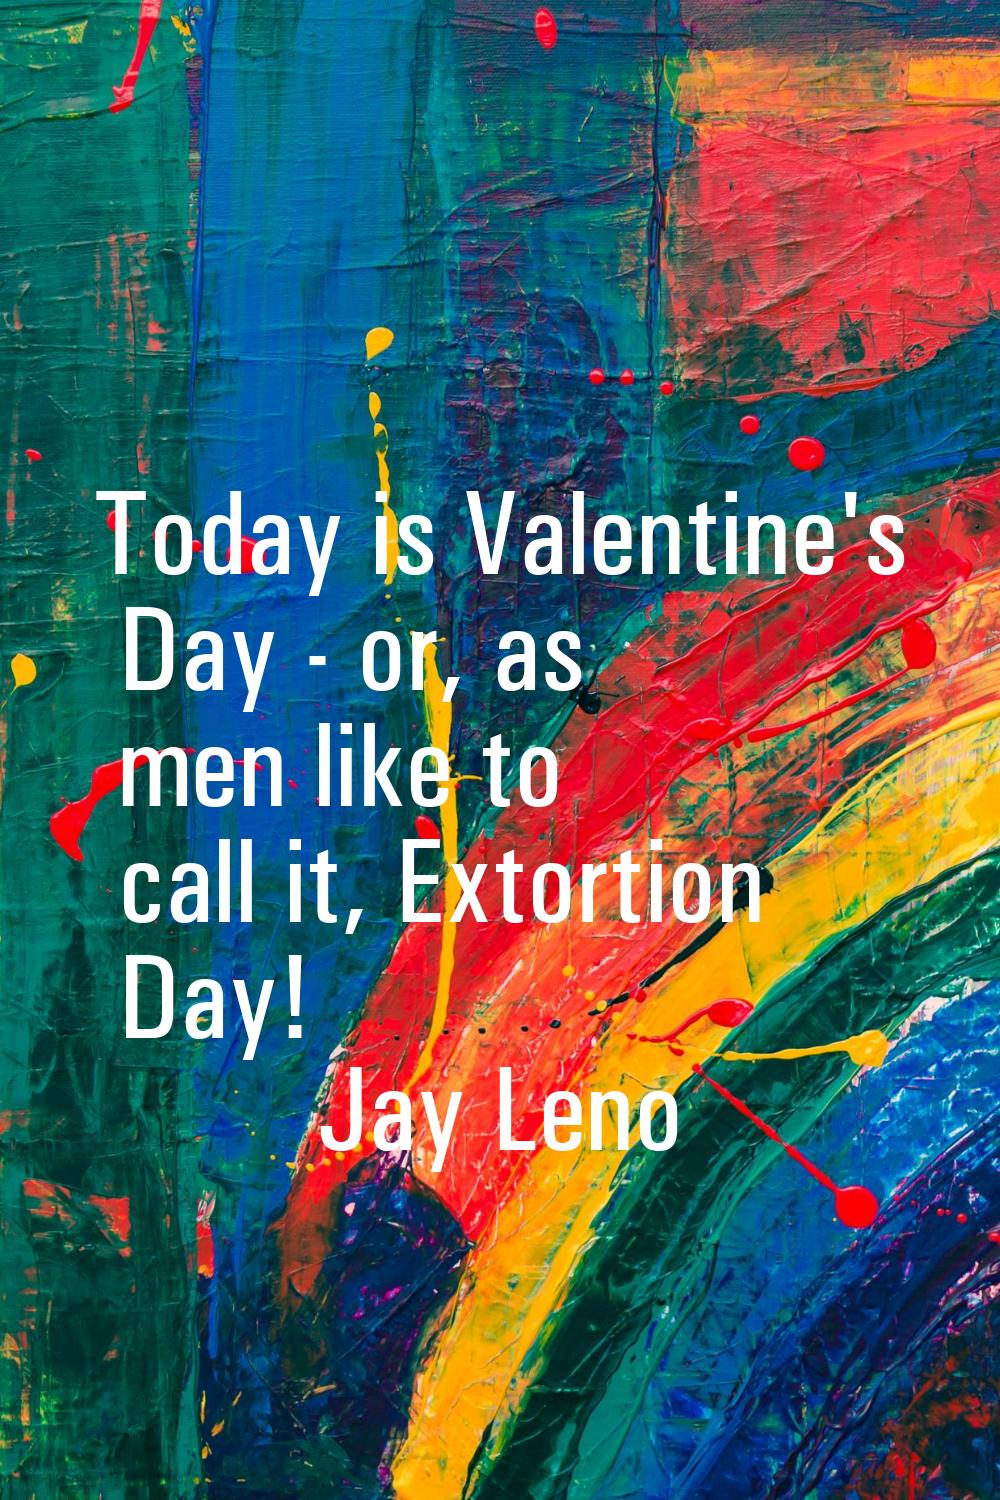 Today is Valentine's Day - or, as men like to call it, Extortion Day!